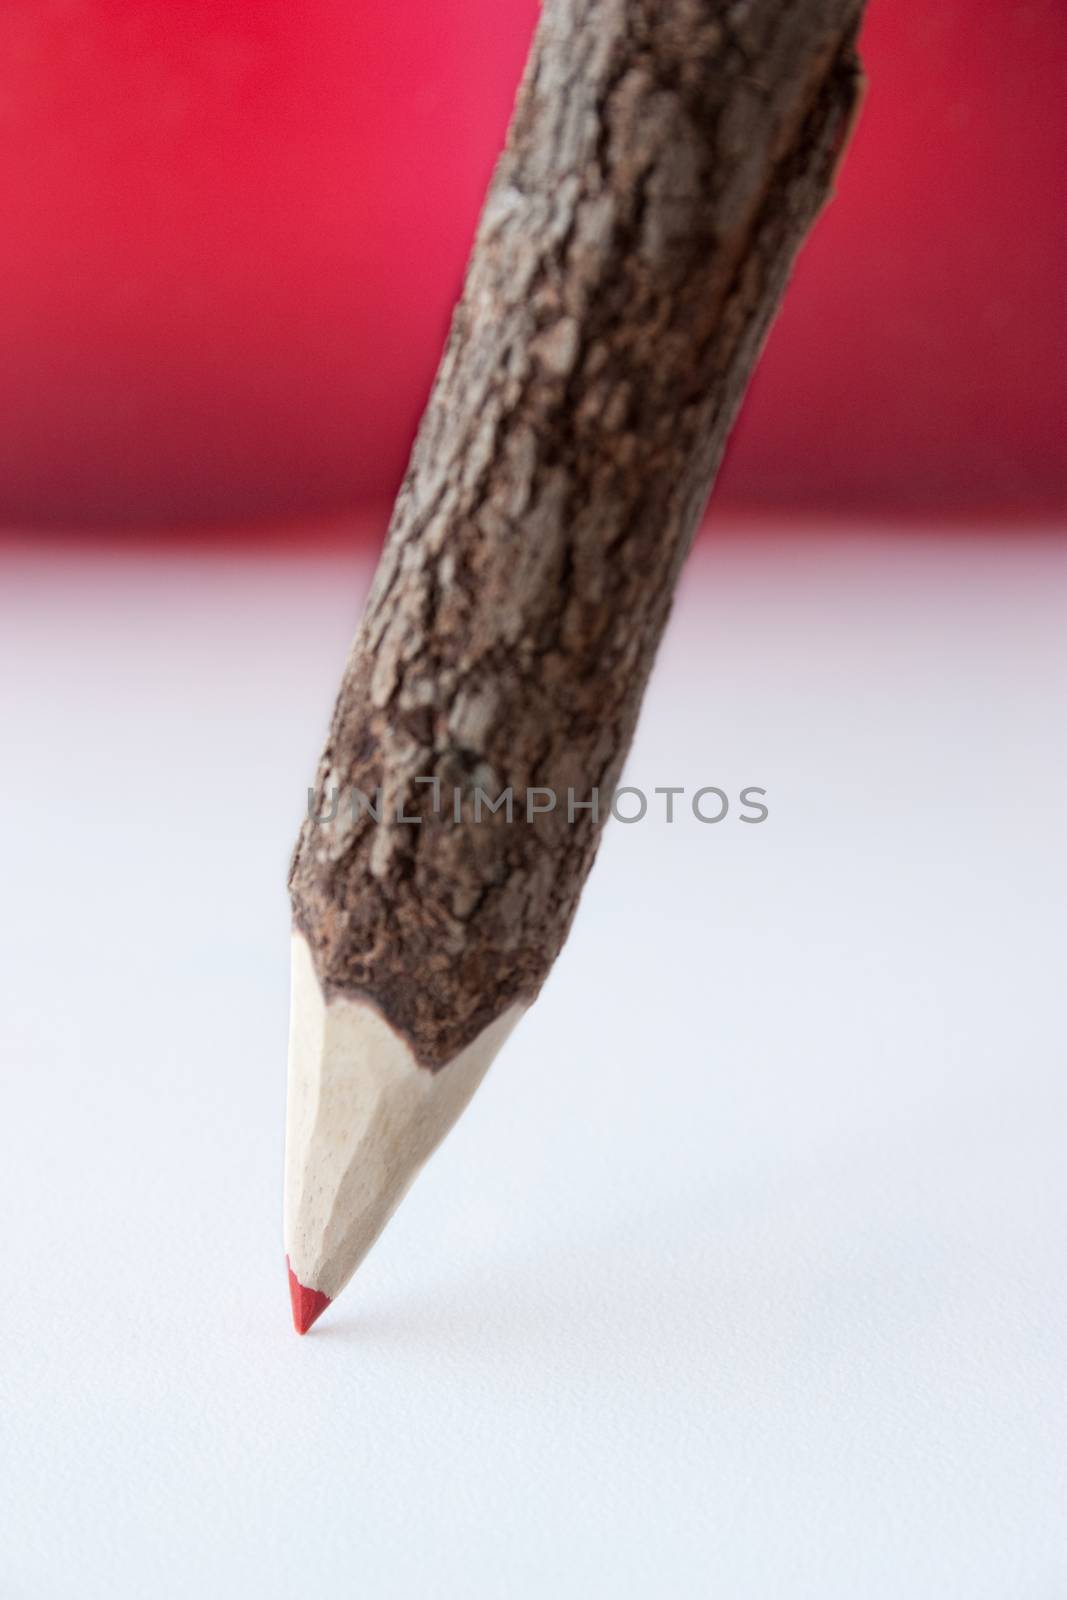 Red pencil red and white background